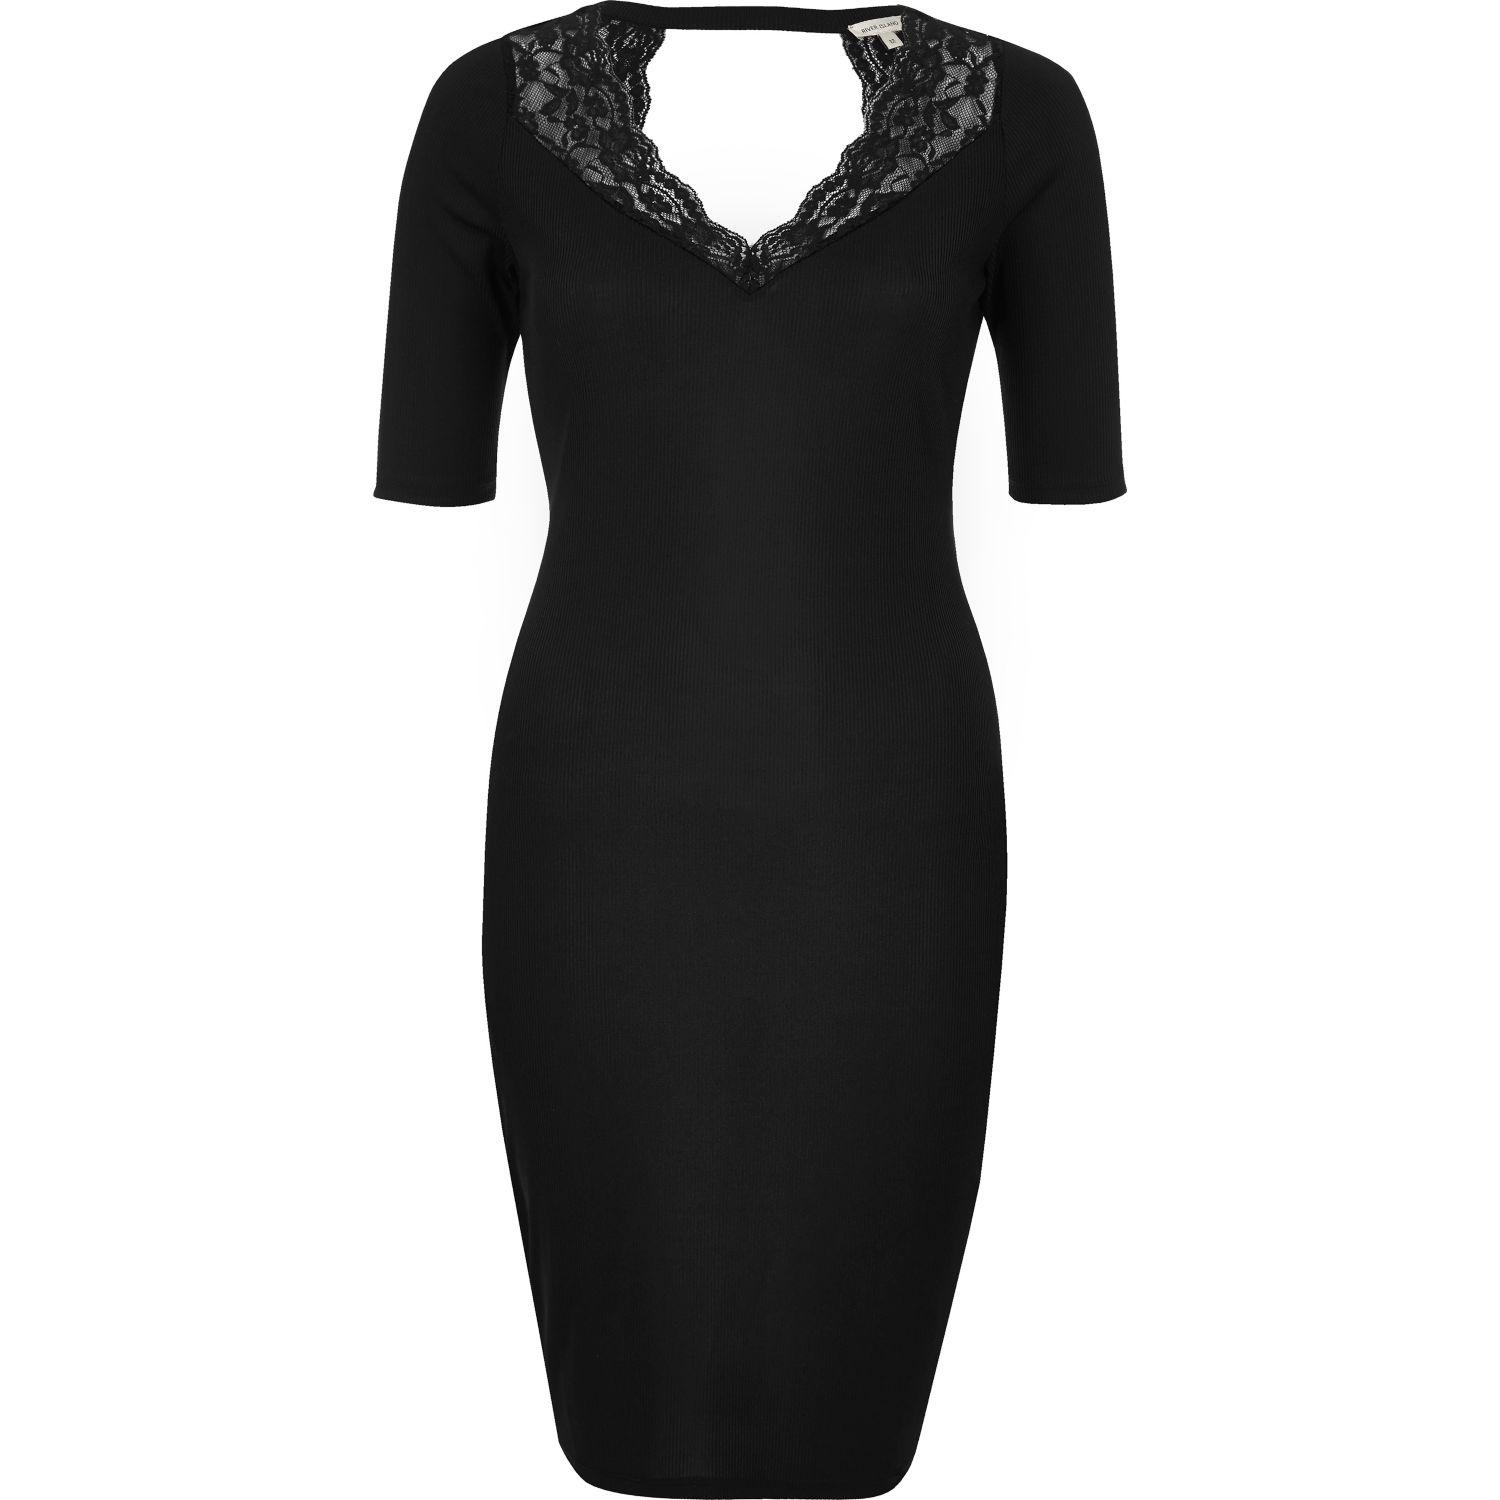 River Island Lace Bodycon Dress : Things To Know Before Choosing